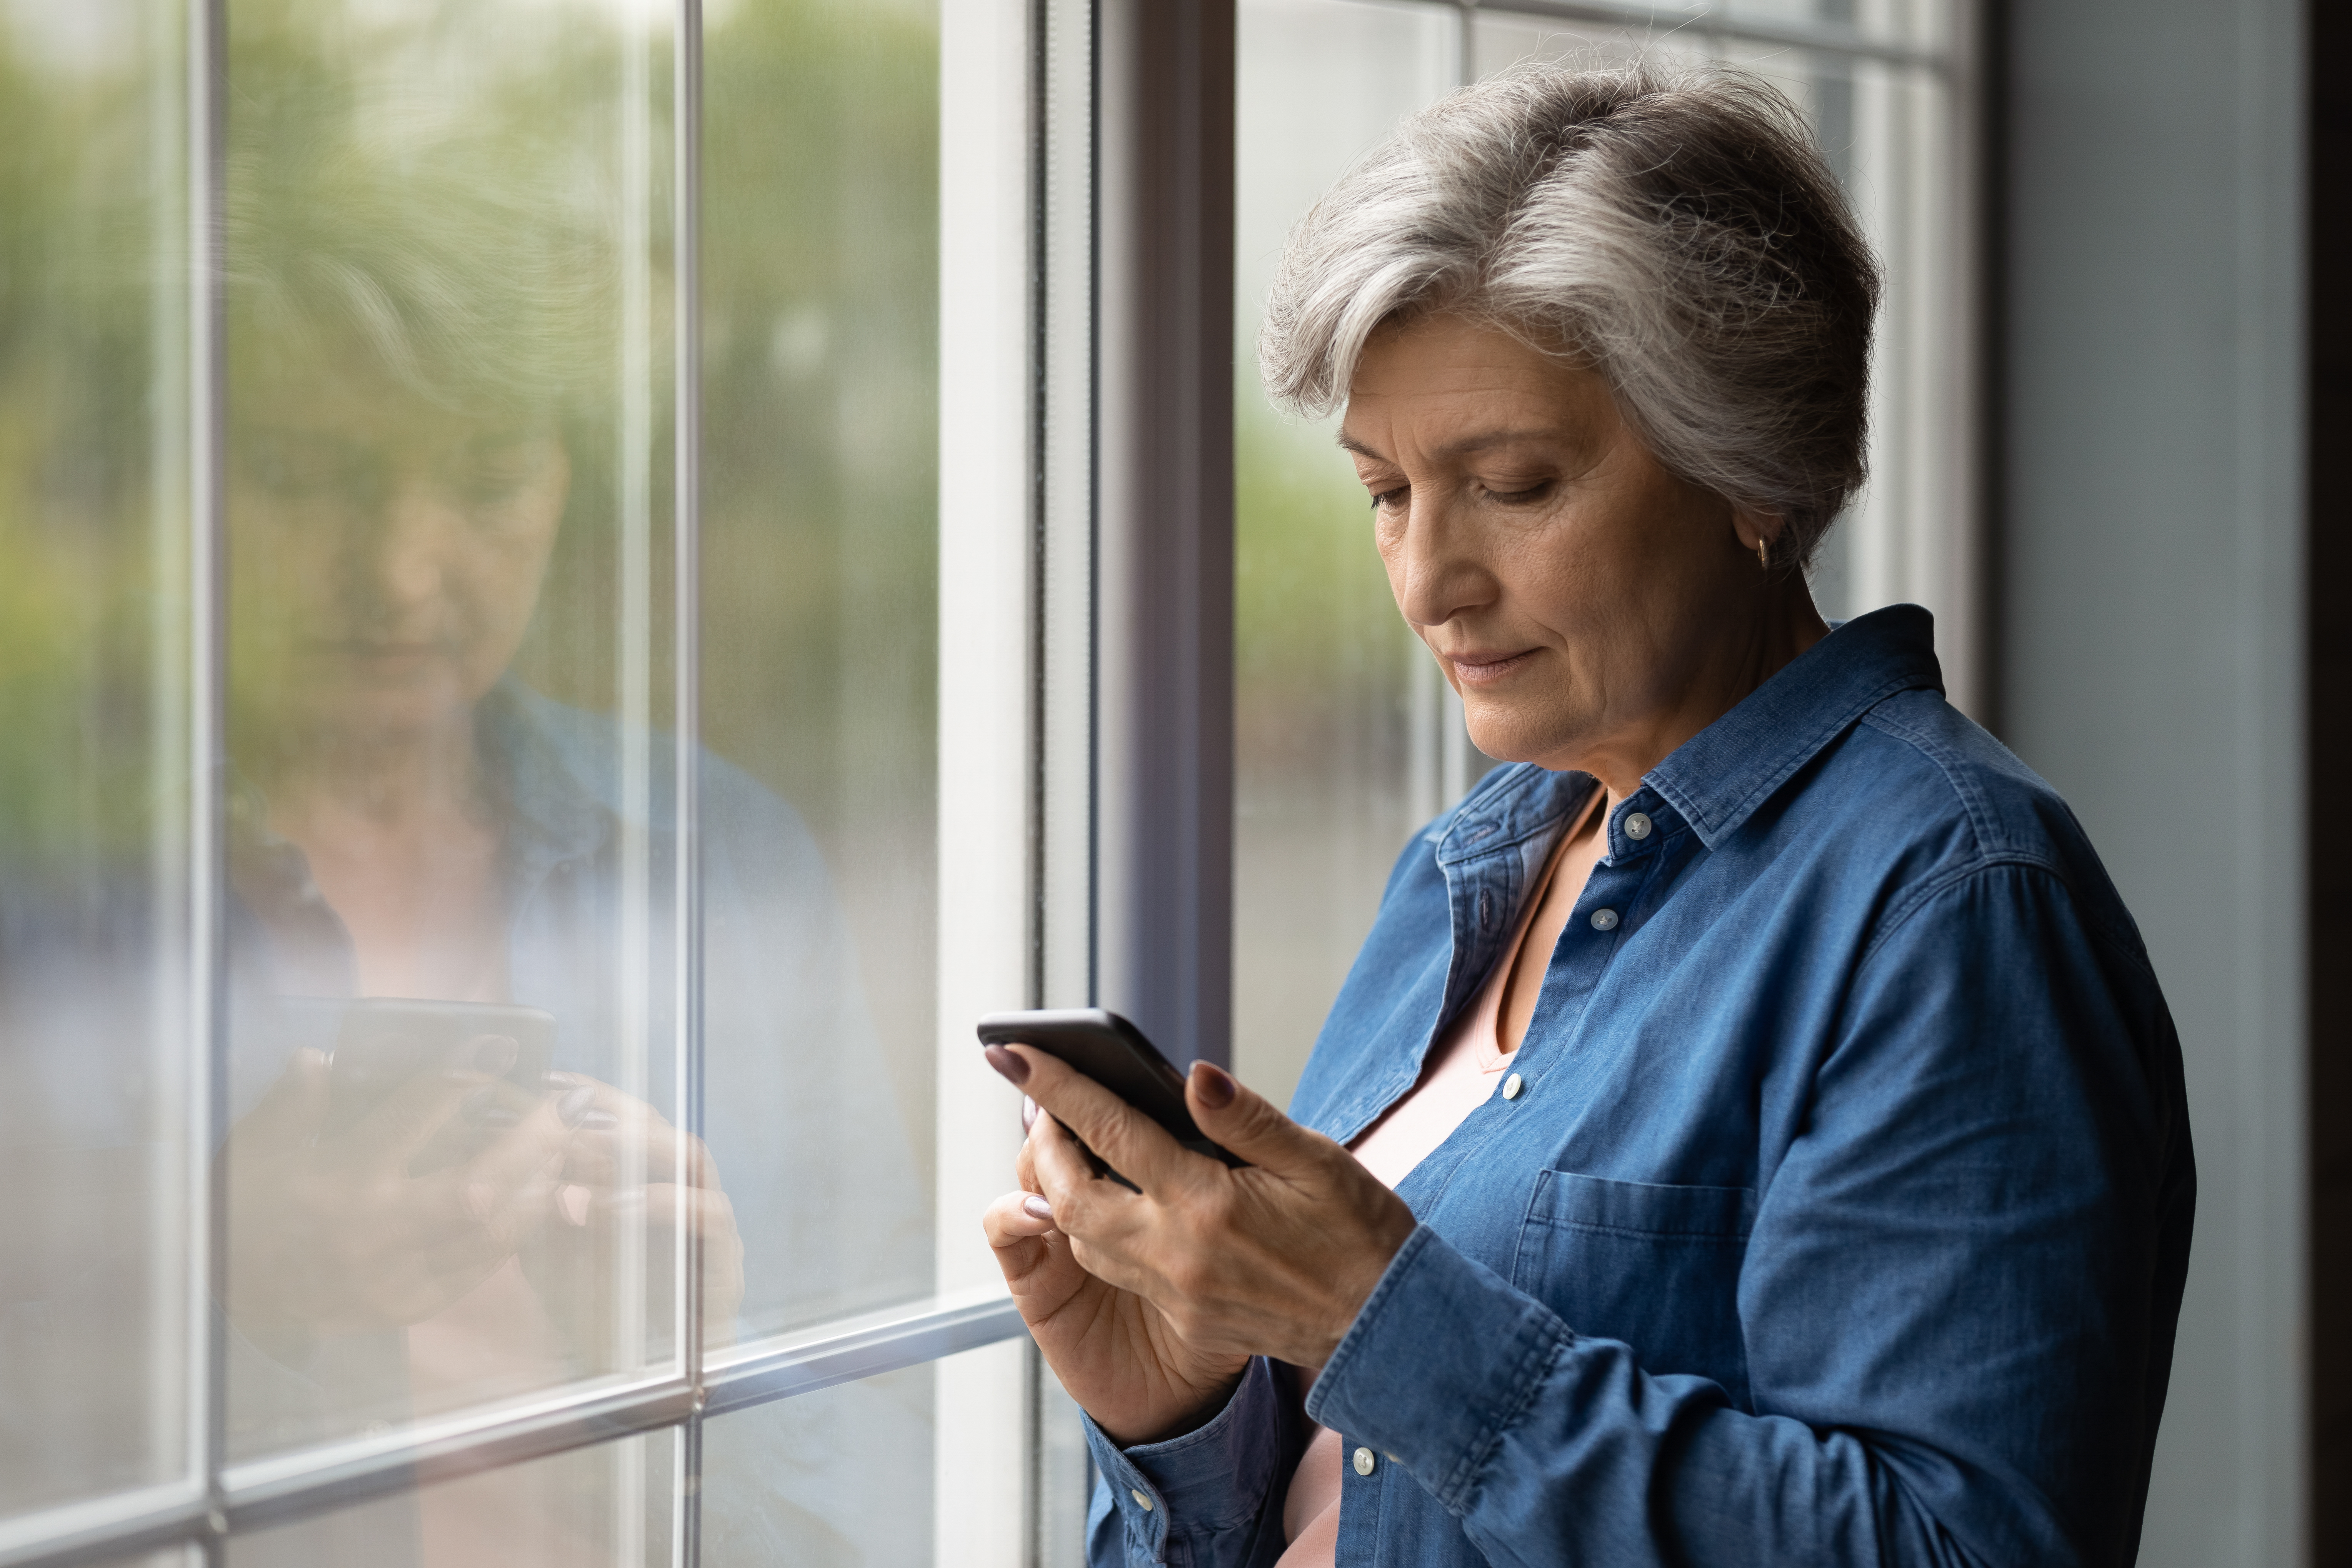 Older woman texting and looking worried. | Source: Shutterstock